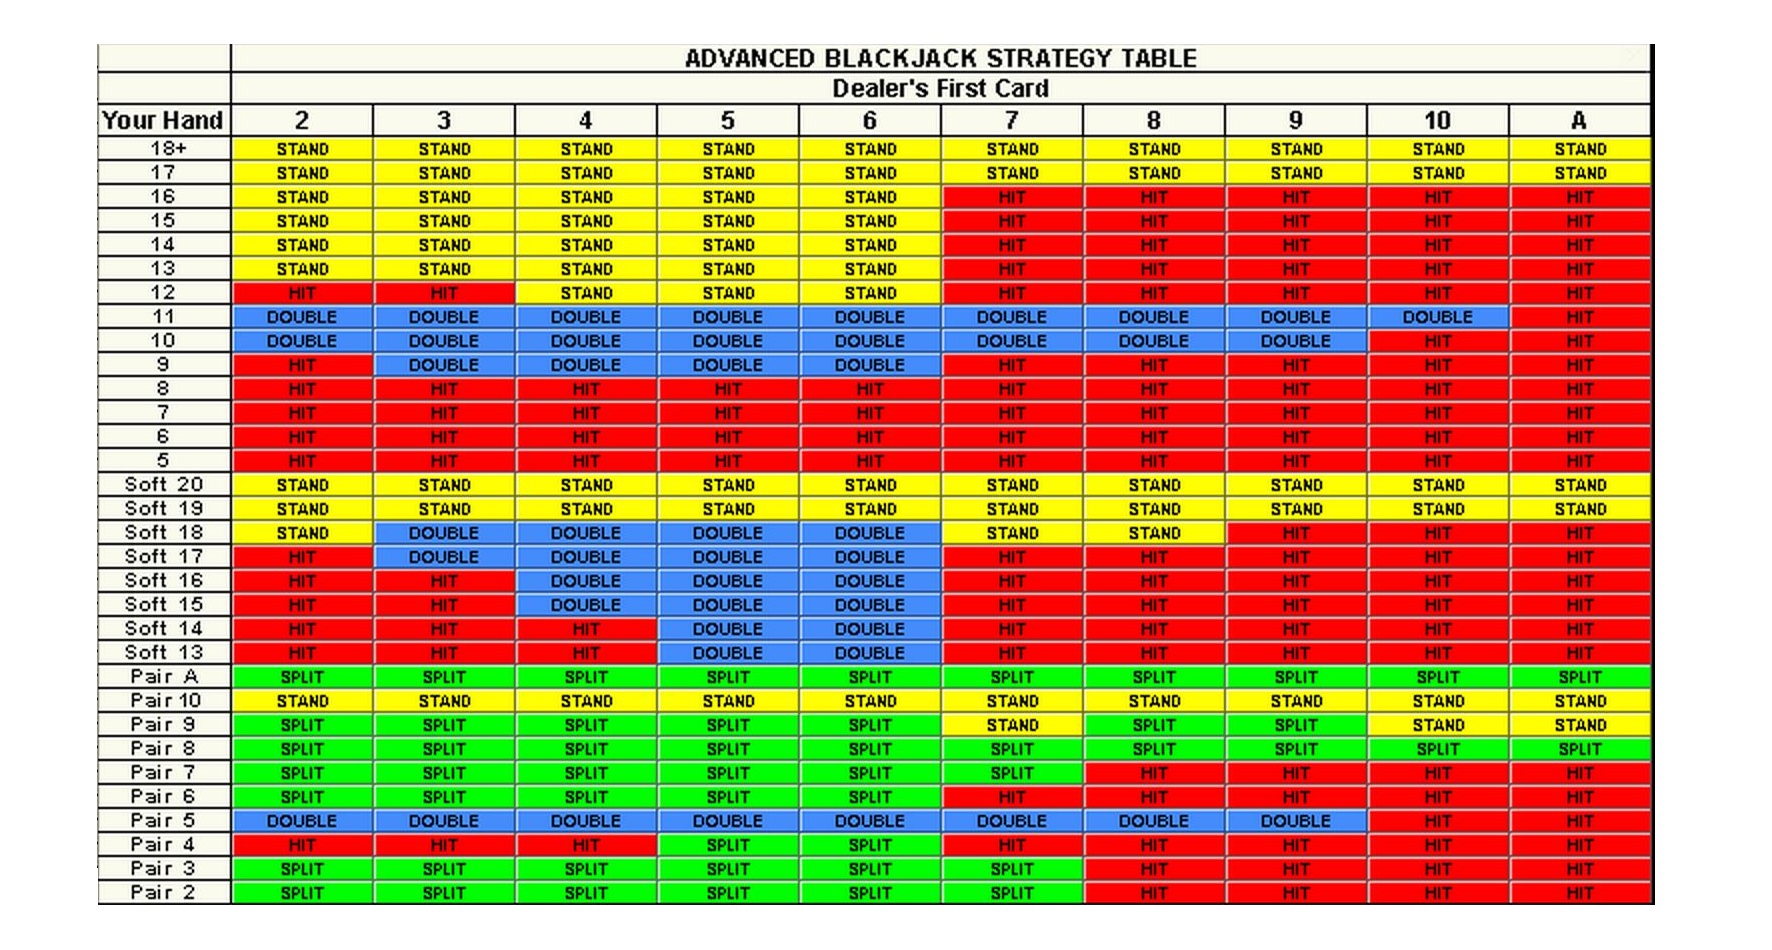 Blackjack Strategy Charts for the specific tables you play on